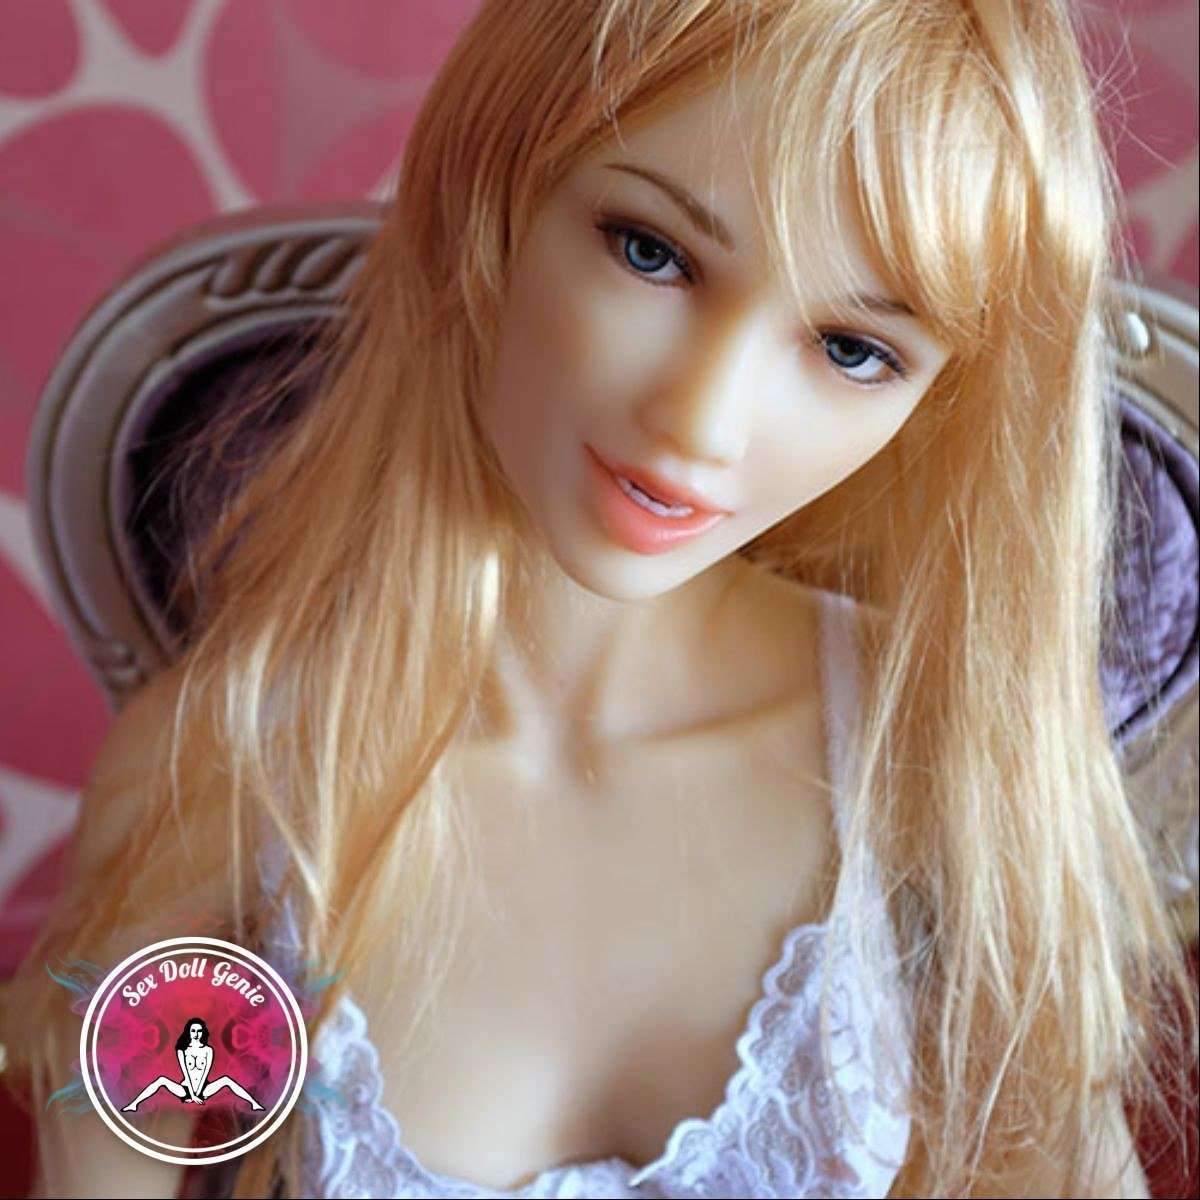 DS Doll - 163 - Penny Head - Type 1 D Cup Silicone Doll-10